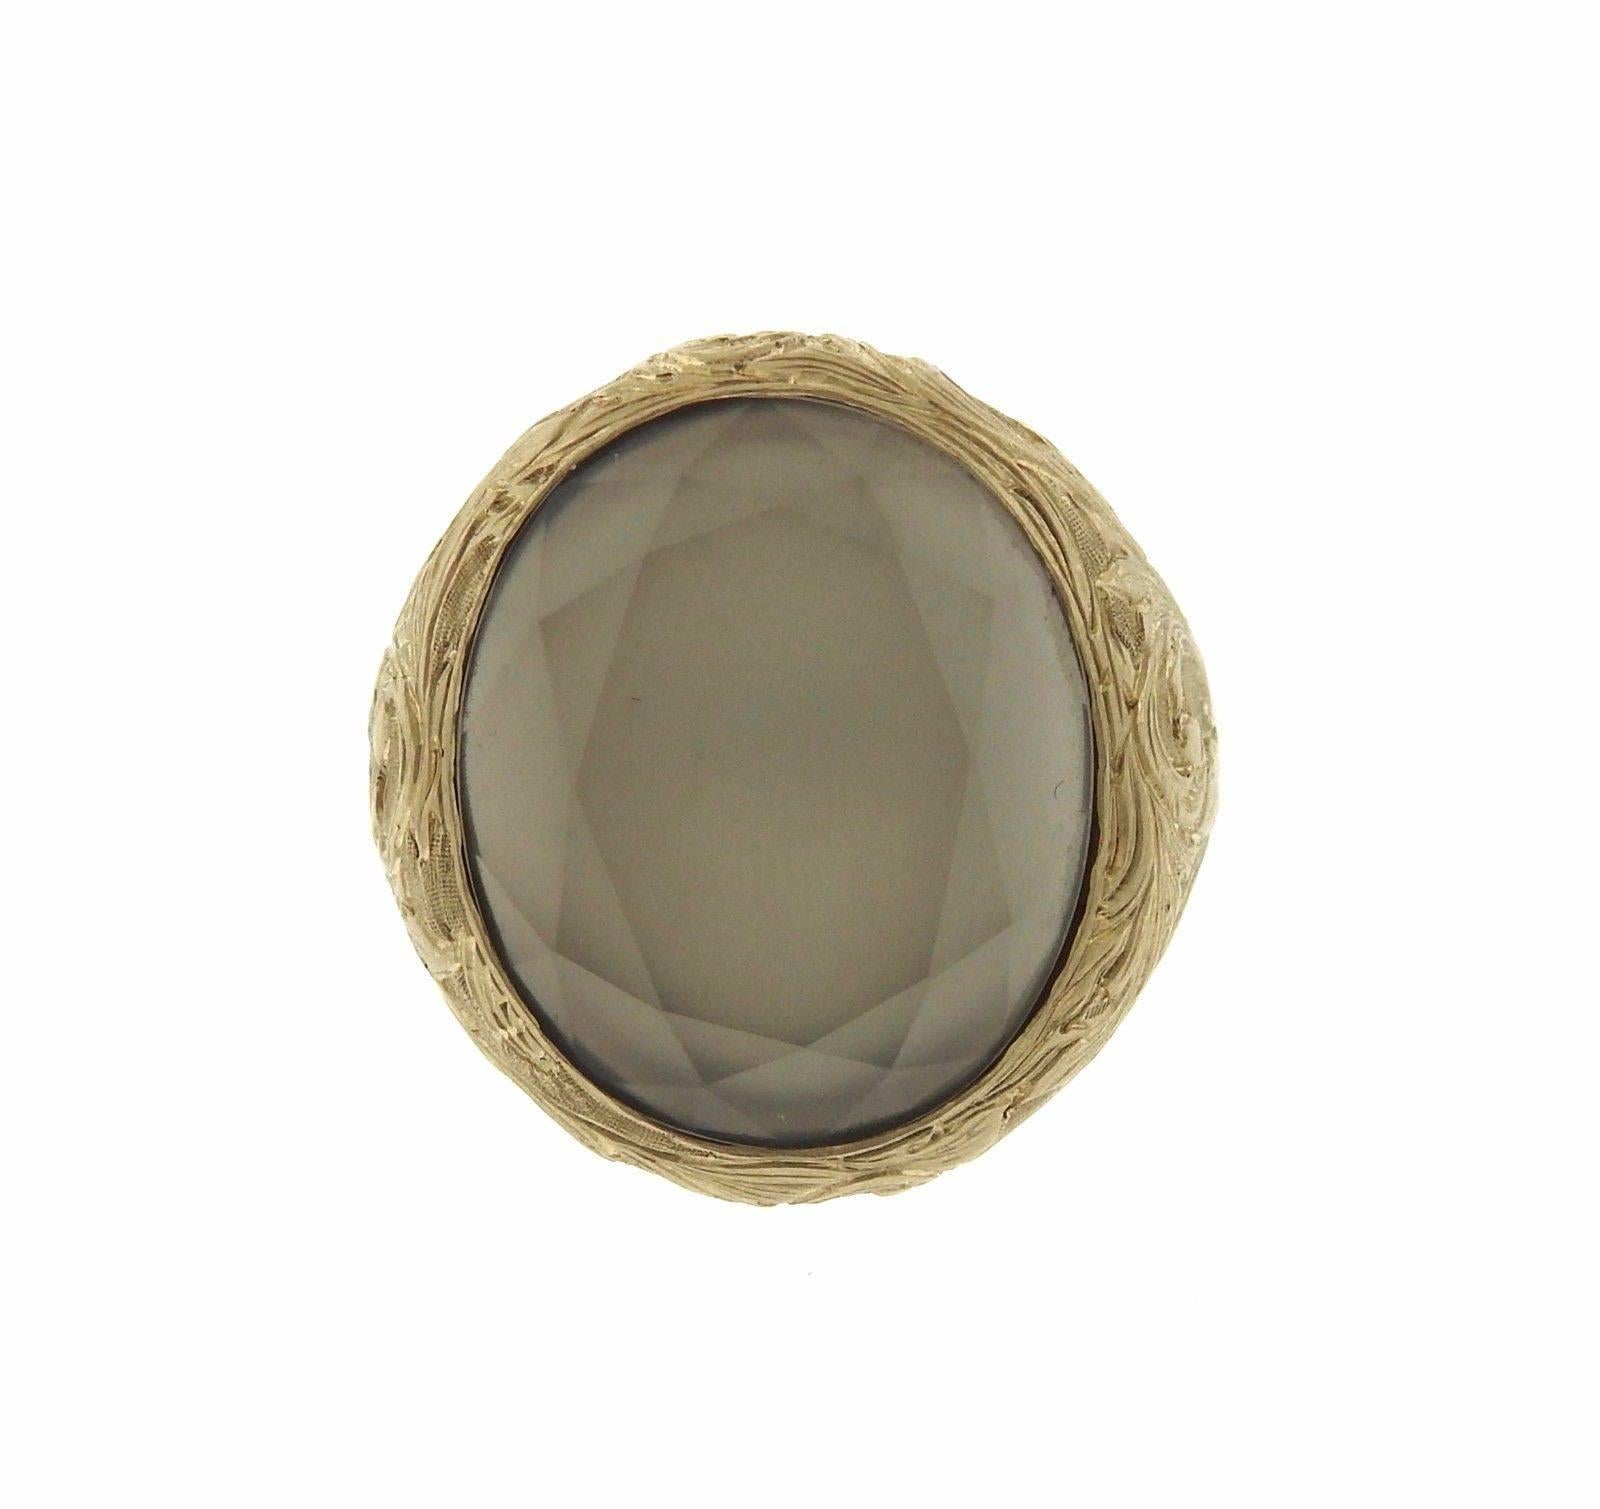 A 19k gold ring set with a faceted gray moonstone.  The ring is a size 5.75, top measures 22.5mm x 21.5mm.  The weight of the ring is 19.3 grams.  Marked: Anaconda, Gold Marks.

Monica Rossi has been designing and creating Anaconda jewelry - a